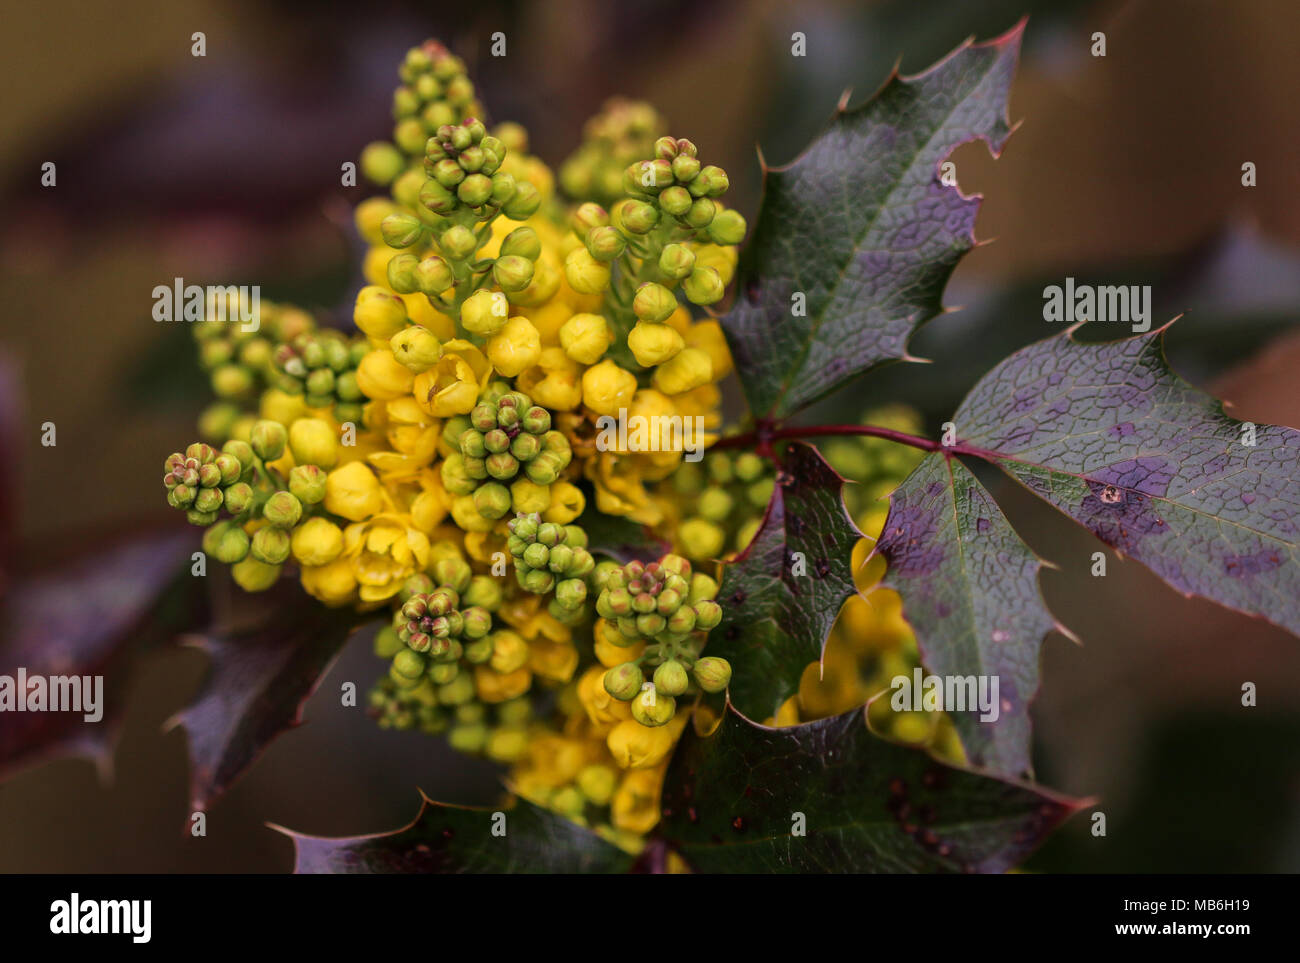 Mahonia, Berberidaceae Oregon Grape, possibly x Wagneri, Undulata, close up showing fragrant yellow flowers, Spring time in Shepperton, England U.K. Stock Photo